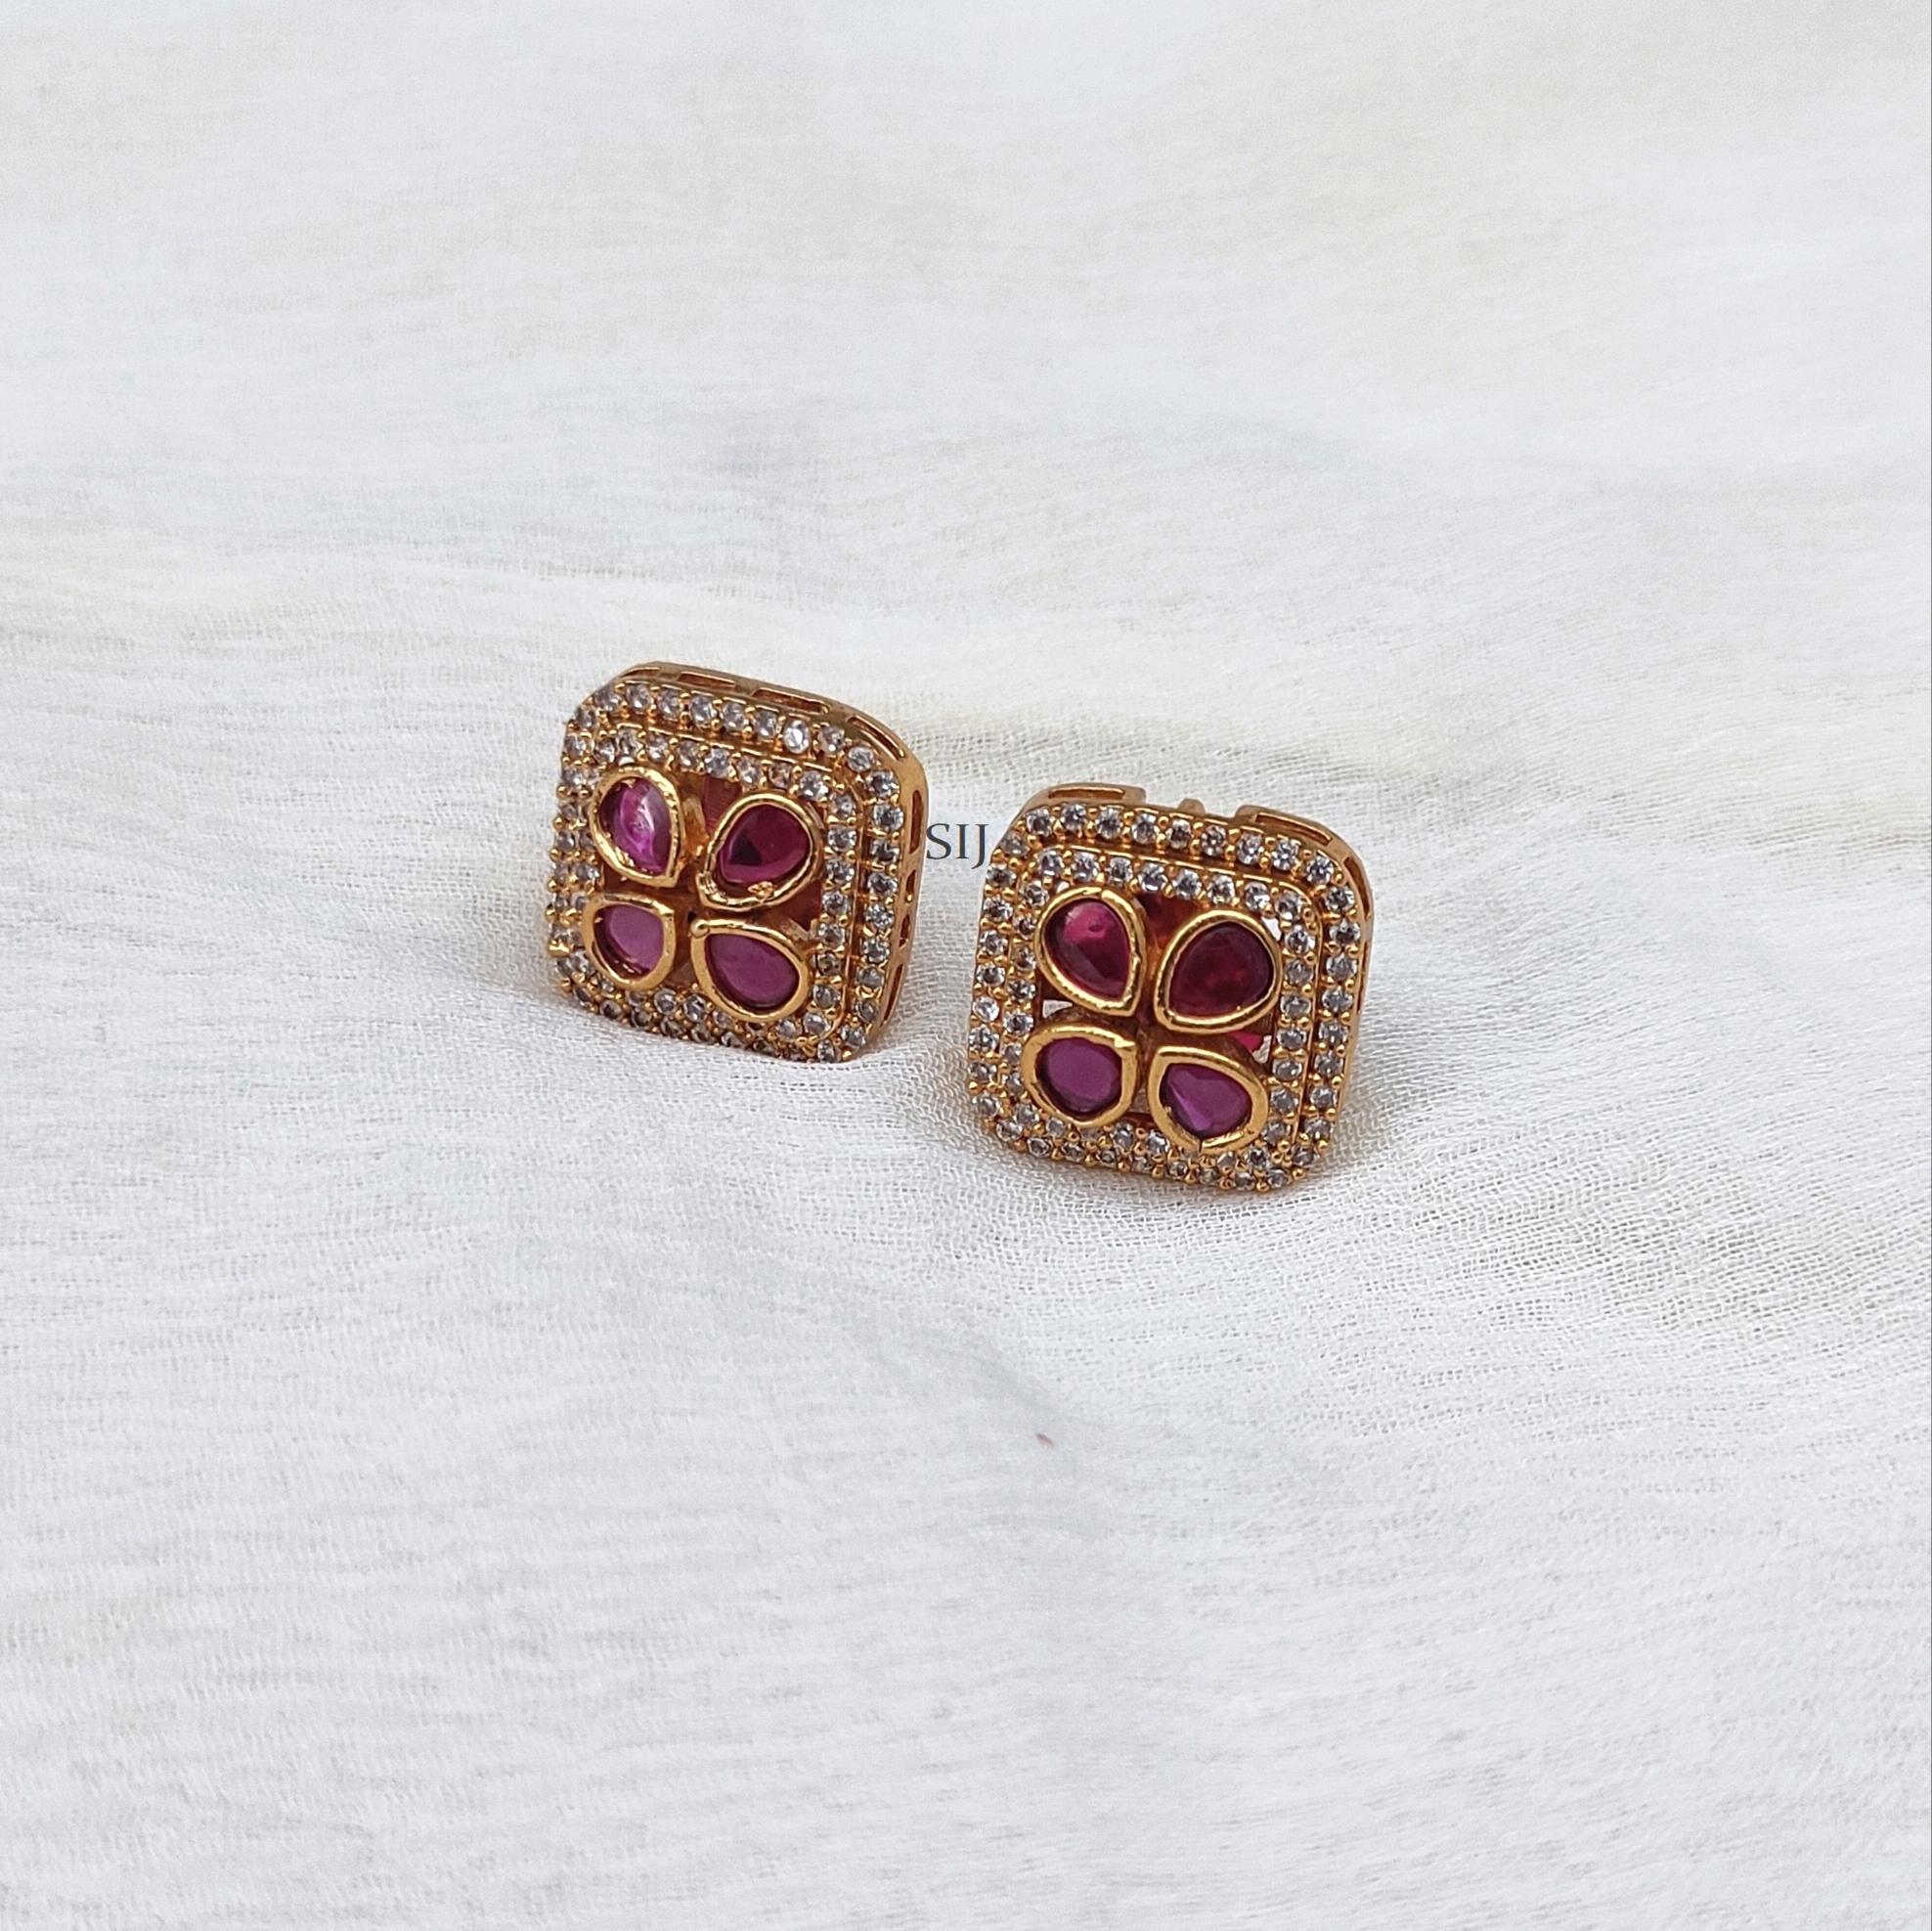 Imitation Ruby and White Stones Ear Studs